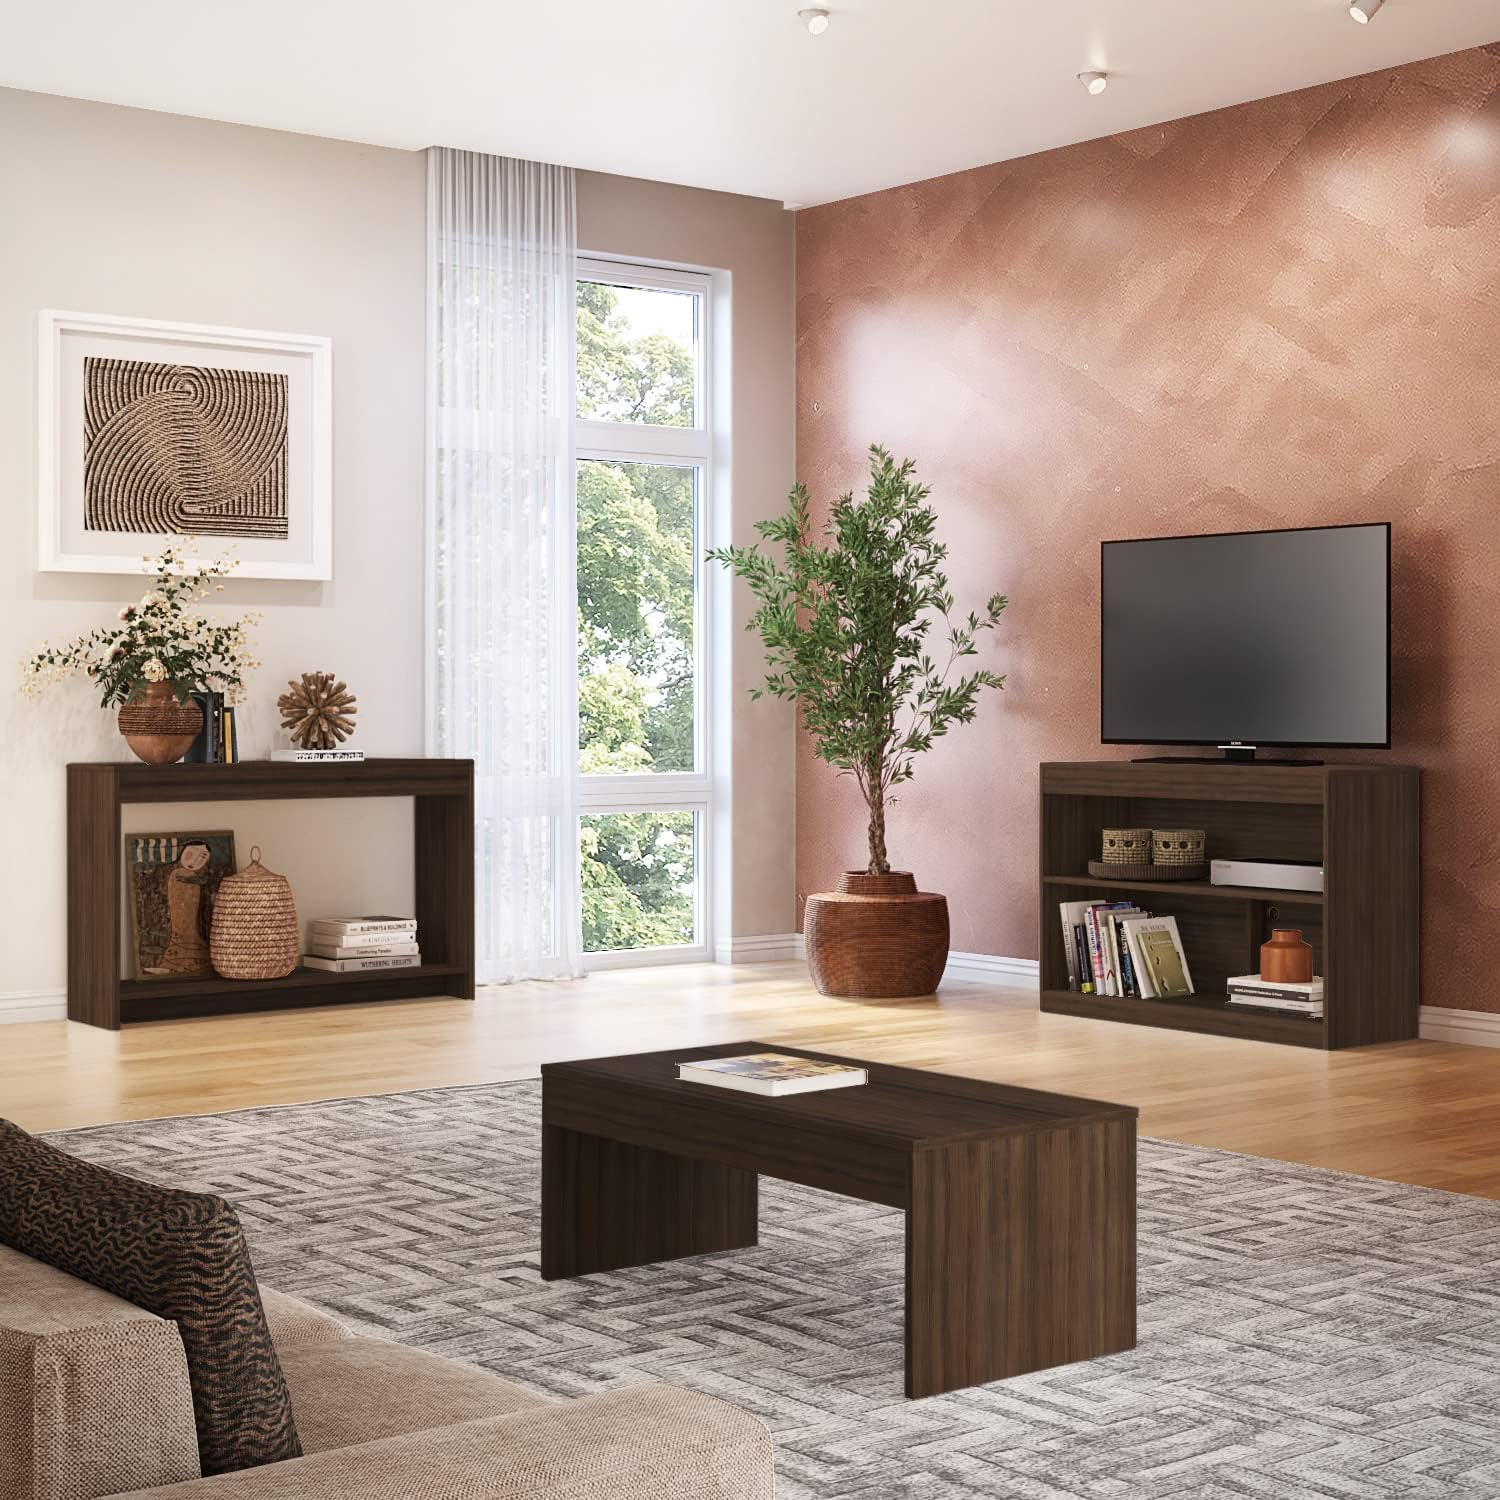 Discount Trends Classic Modern Living Room Set: Harmonious 3-Piece Coffee Table, Sideboard & 42 inchs TV Stand.